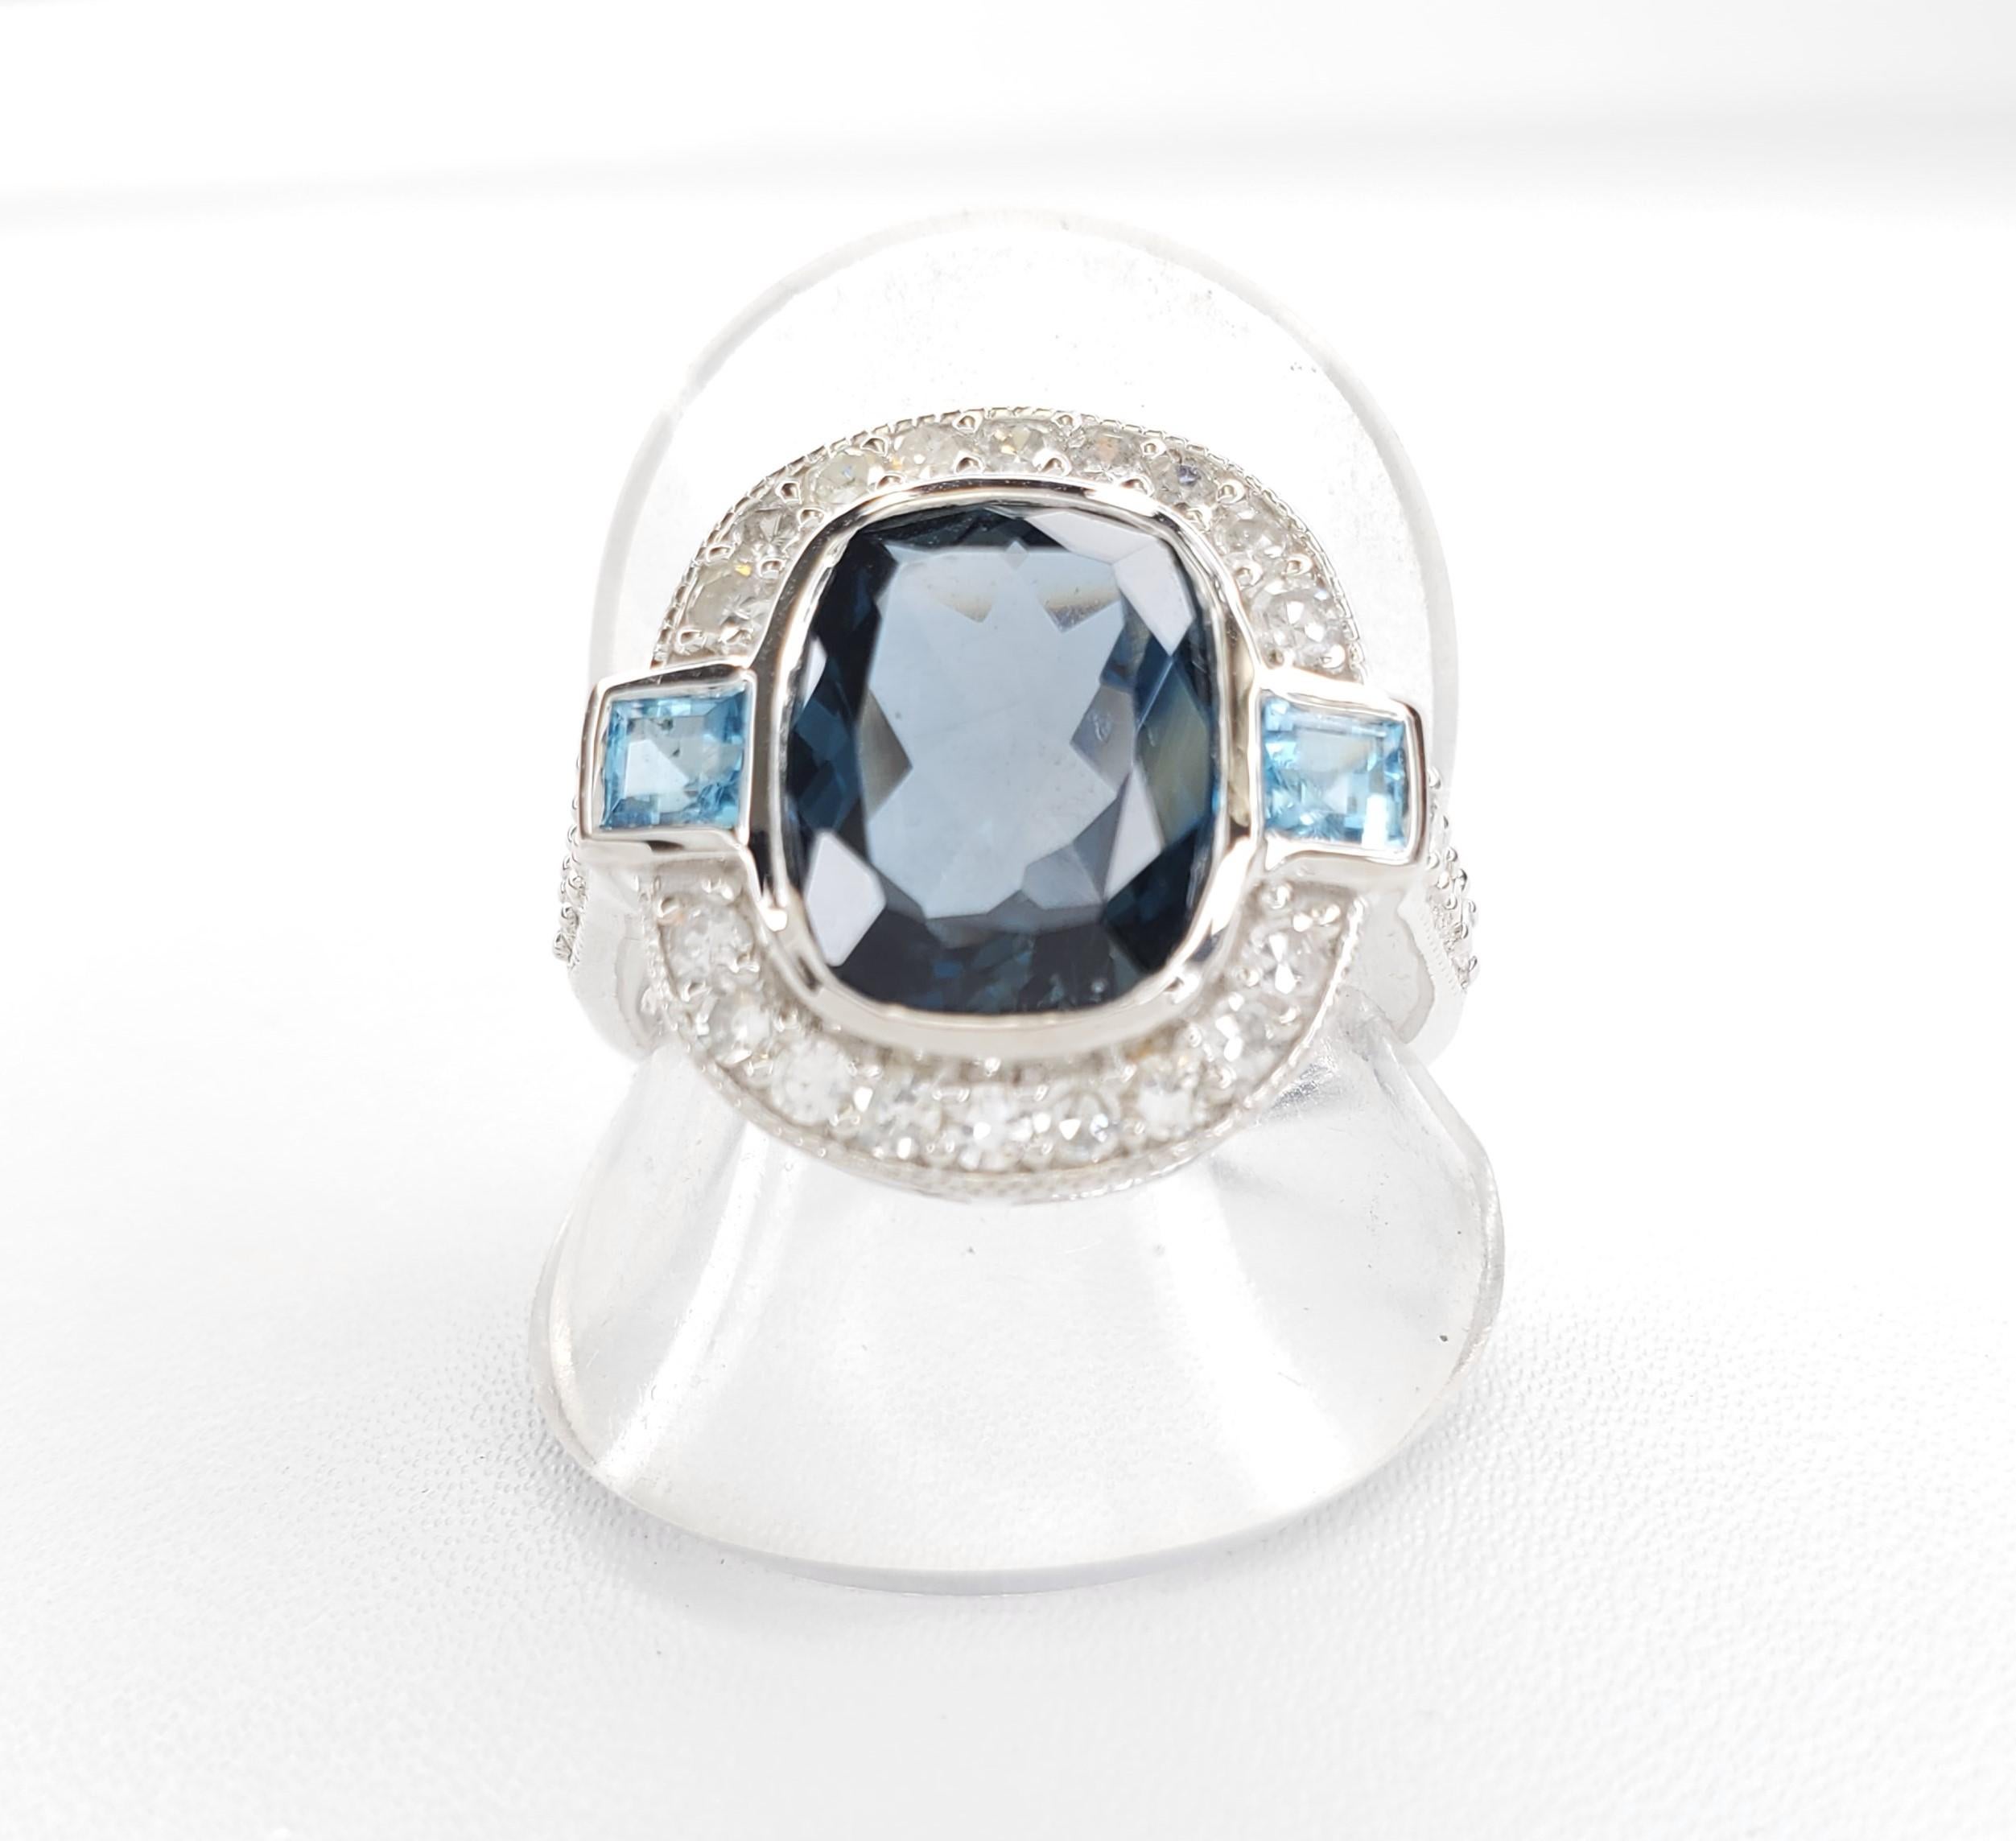 5.32cttw London and White Diamond Blue Topaz Sterling Silver Ring In New Condition For Sale In Great Neck, NY